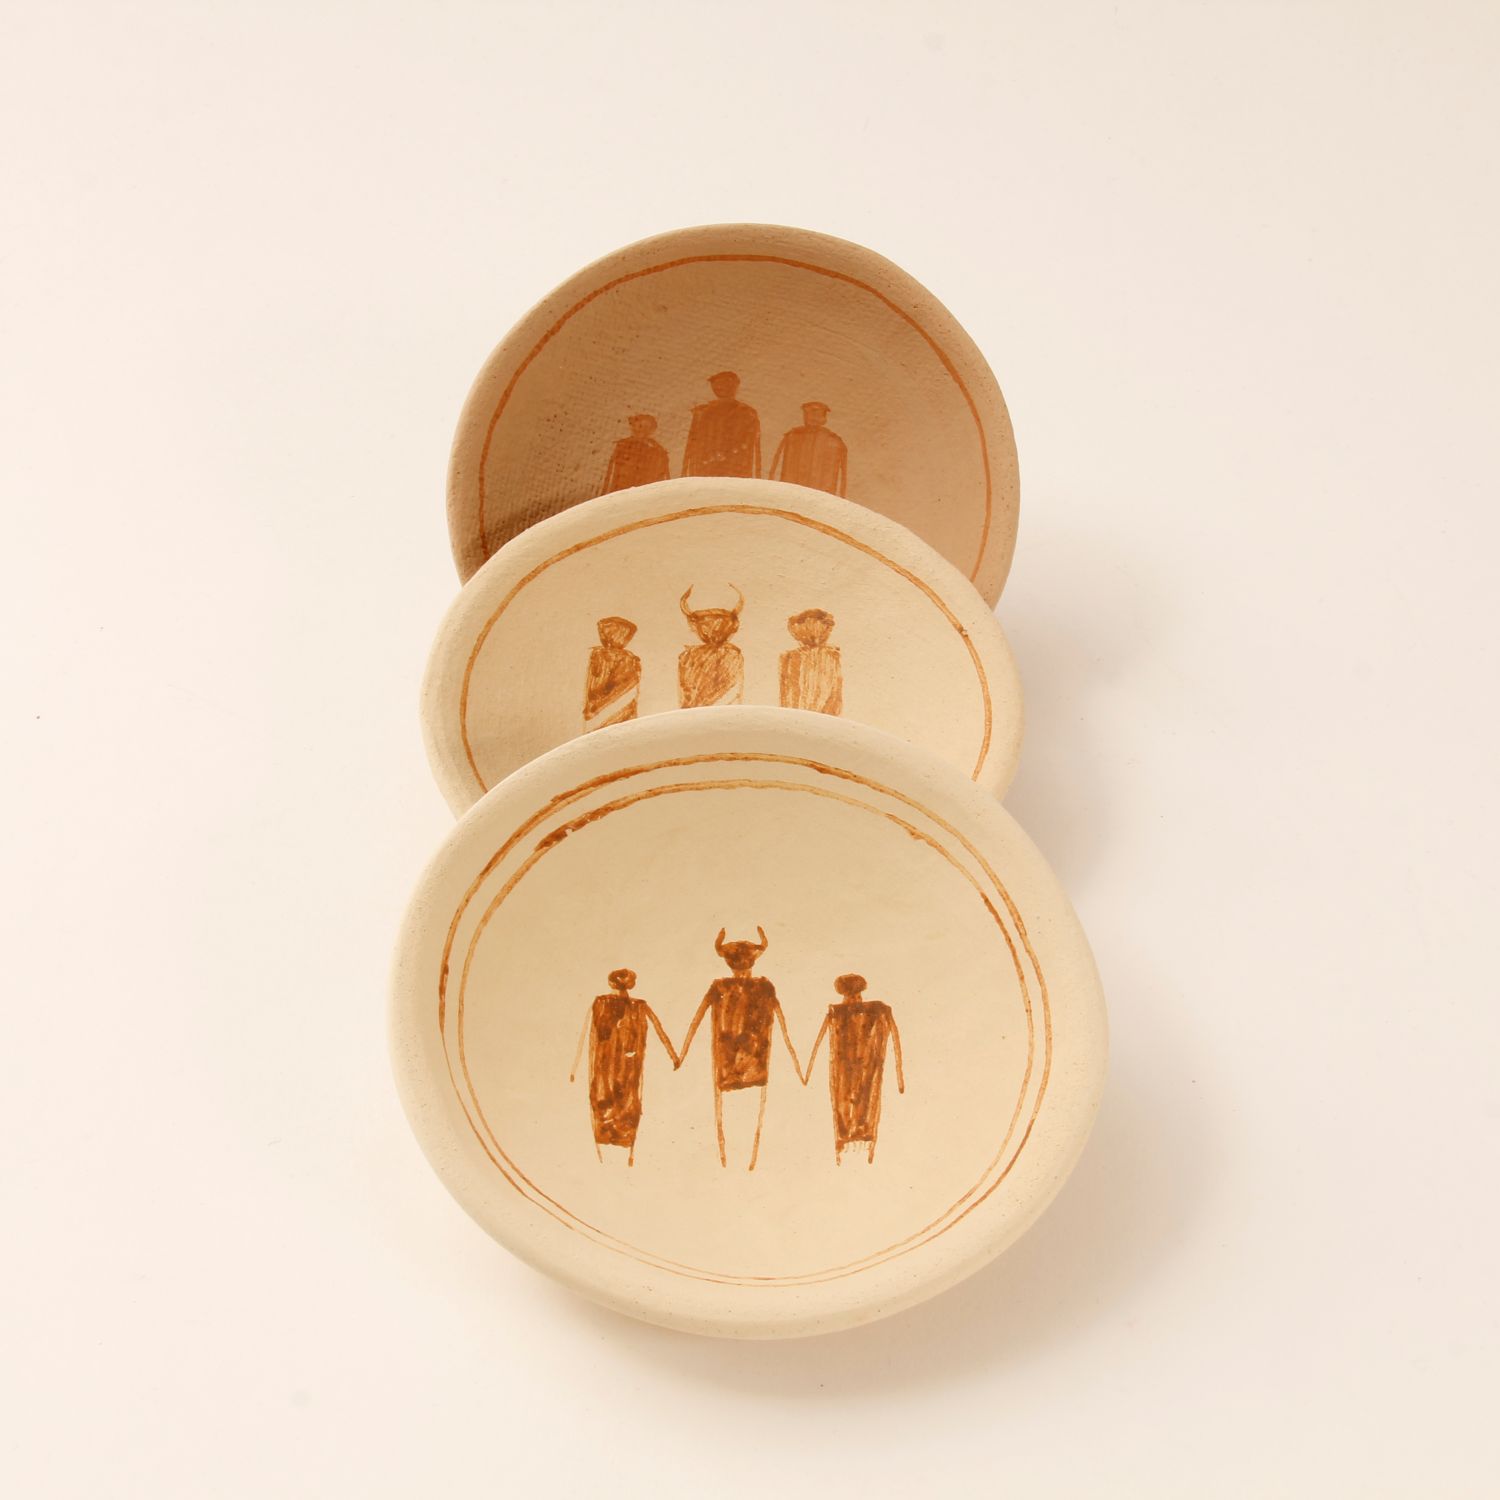 David Migwans: Assorted Family Bowl with Three Figures (Each sold separately) Product Image 1 of 2